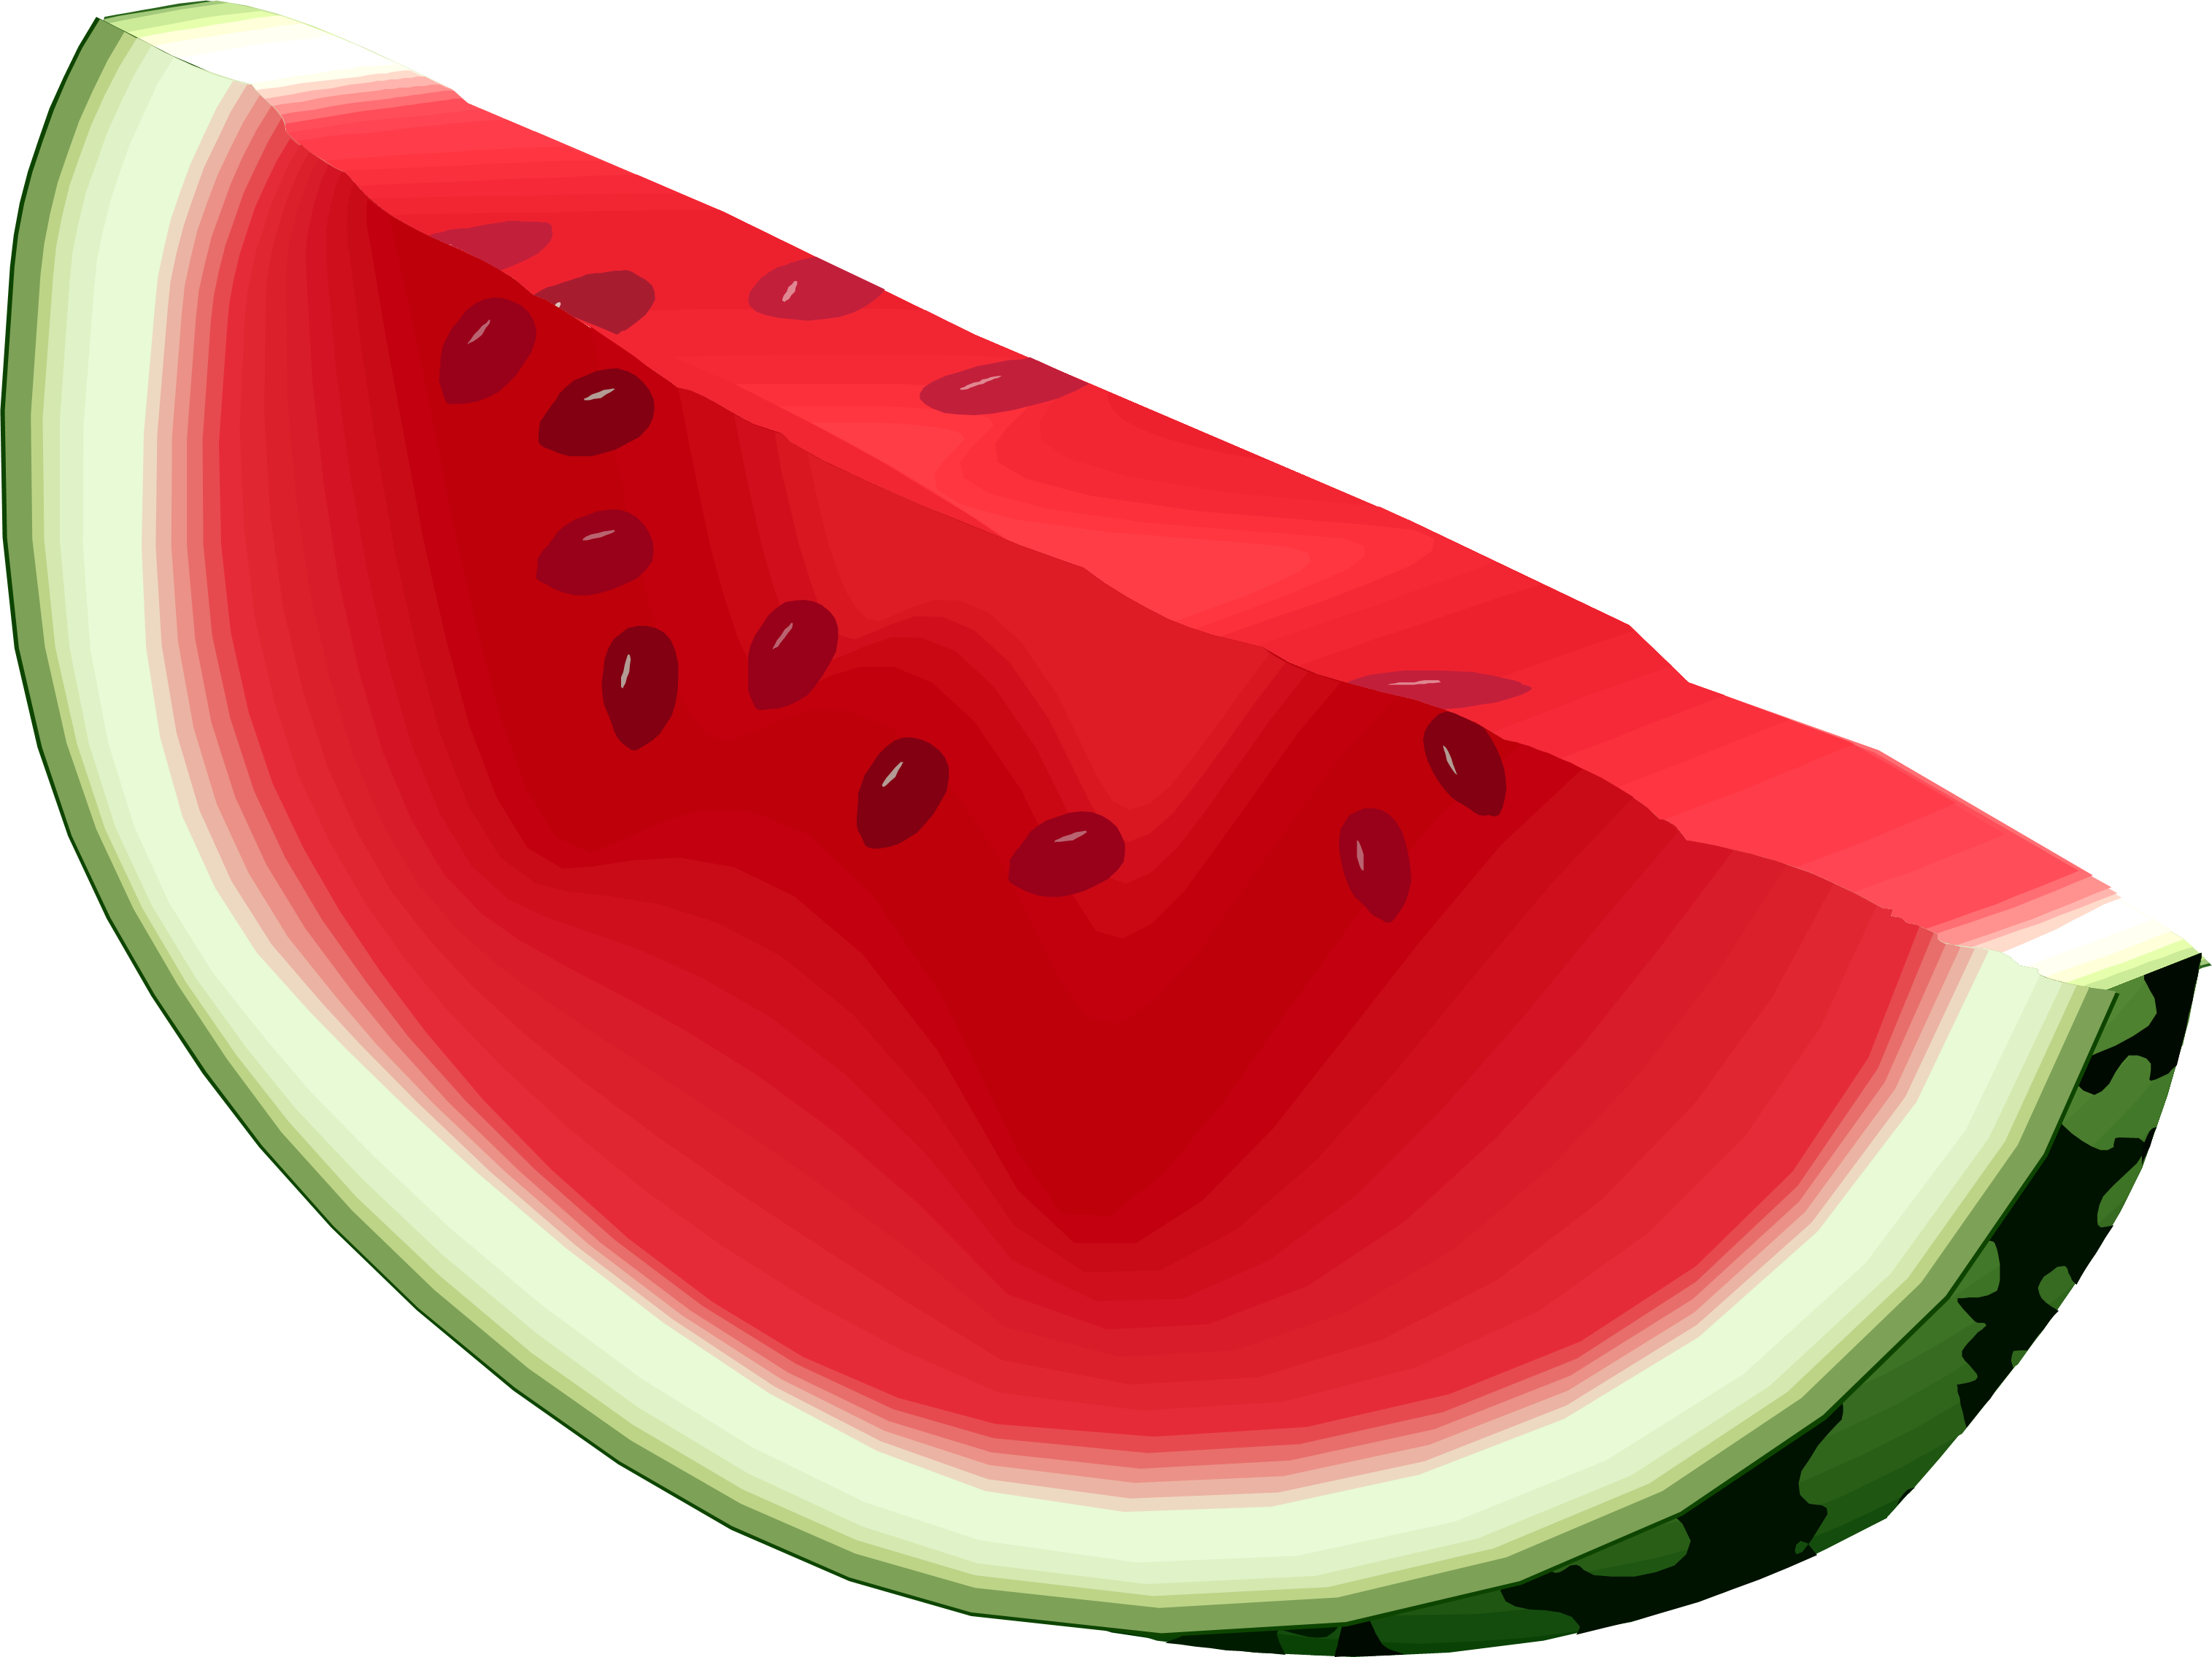 Backgrounds For Watermelon Slice Clip Art No Background - Watermelon With Transparent Background (3031x2271)